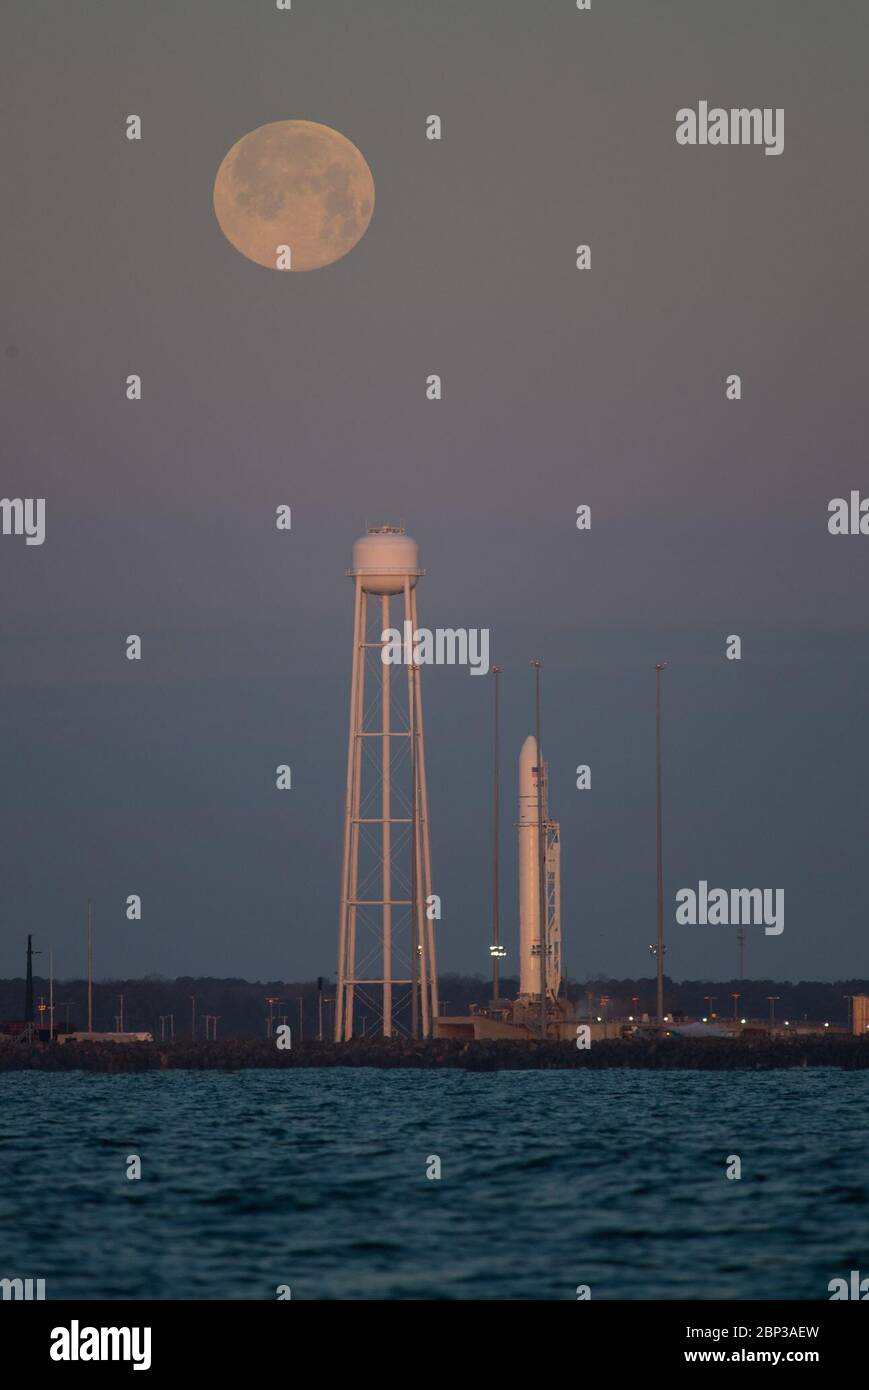 Northrop Grumman Antares CRS-13 Prelaunch  A Northrop Grumman Antares rocket carrying a Cygnus resupply spacecraft is seen at sunrise as the Moon sets on Pad-0A, Sunday, Feb. 9, 2020, at NASA's Wallops Flight Facility in Virginia. Northrop Grumman’s 13th contracted cargo resupply mission with NASA to the International Space Station will deliver more than 7,500 pounds of science and research, crew supplies and vehicle hardware to the orbital laboratory and its crew. The CRS-13 Cygnus spacecraft is named after the first African American astronaut, Major Robert Henry Lawrence Jr.. Stock Photo